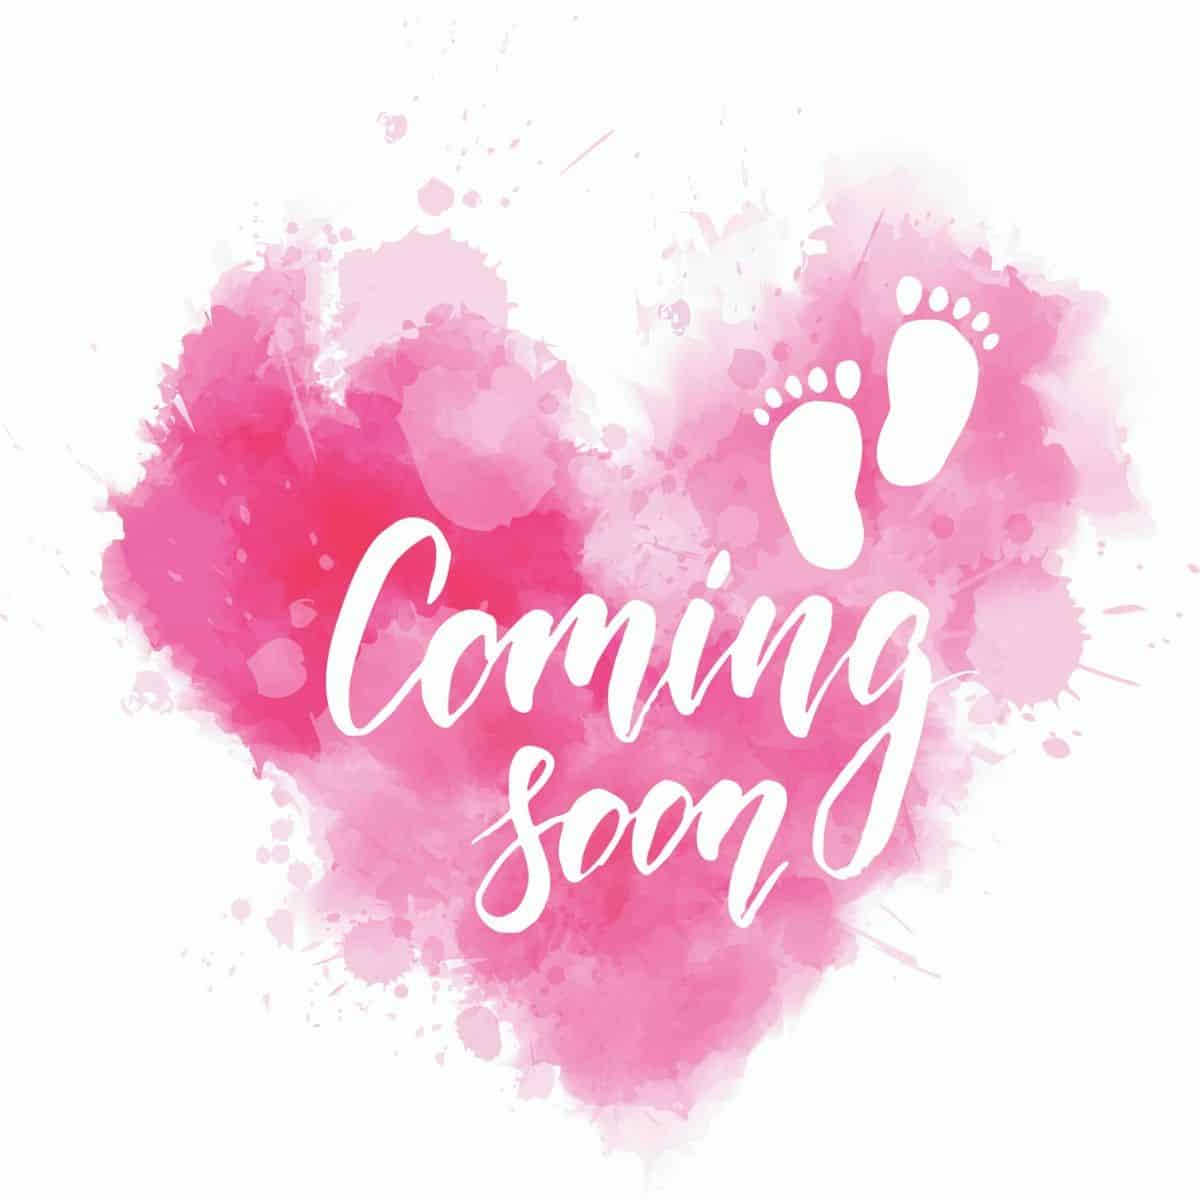 pink watercolor paint in the shape of a heart, with baby footprints and the words "coming soon"